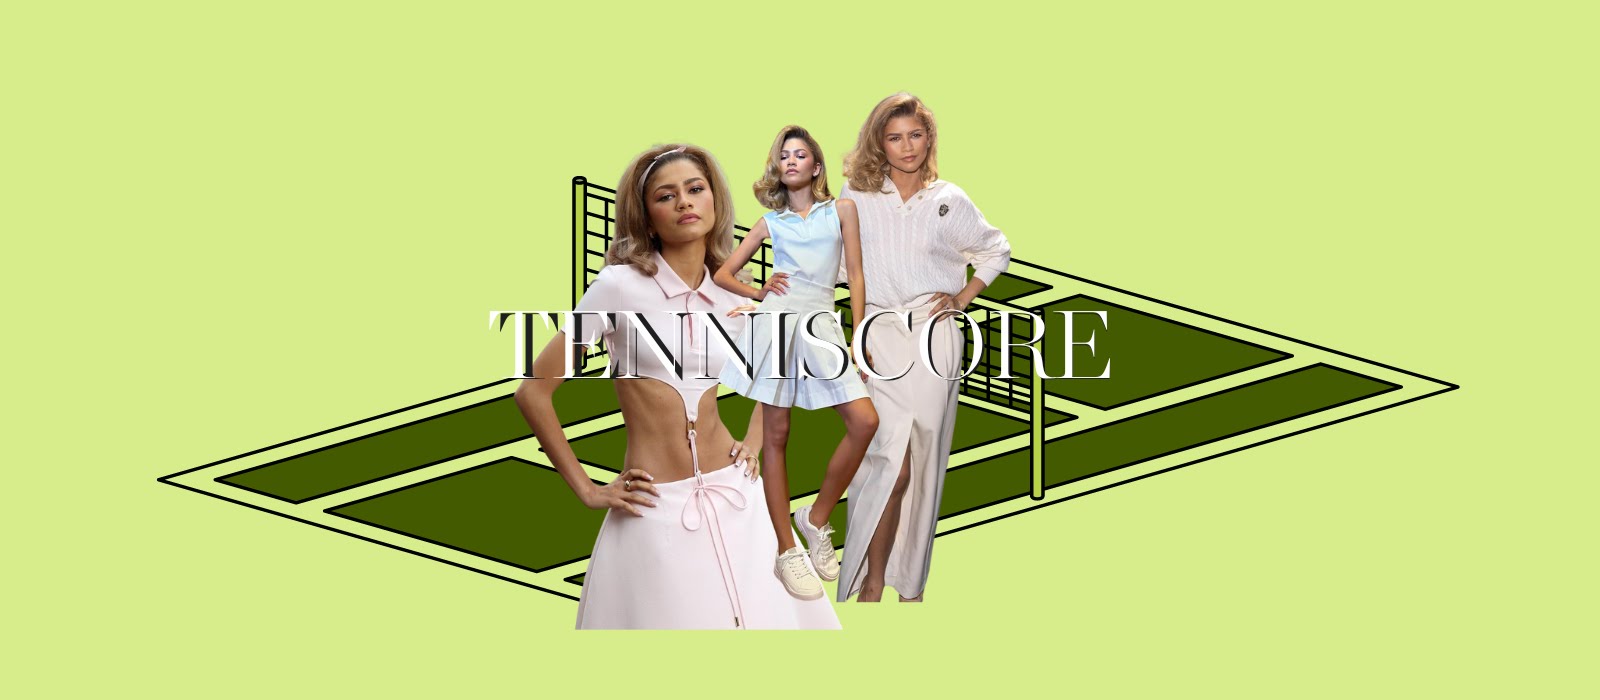 The rise of the tennis aesthetic (thank you Zendaya)